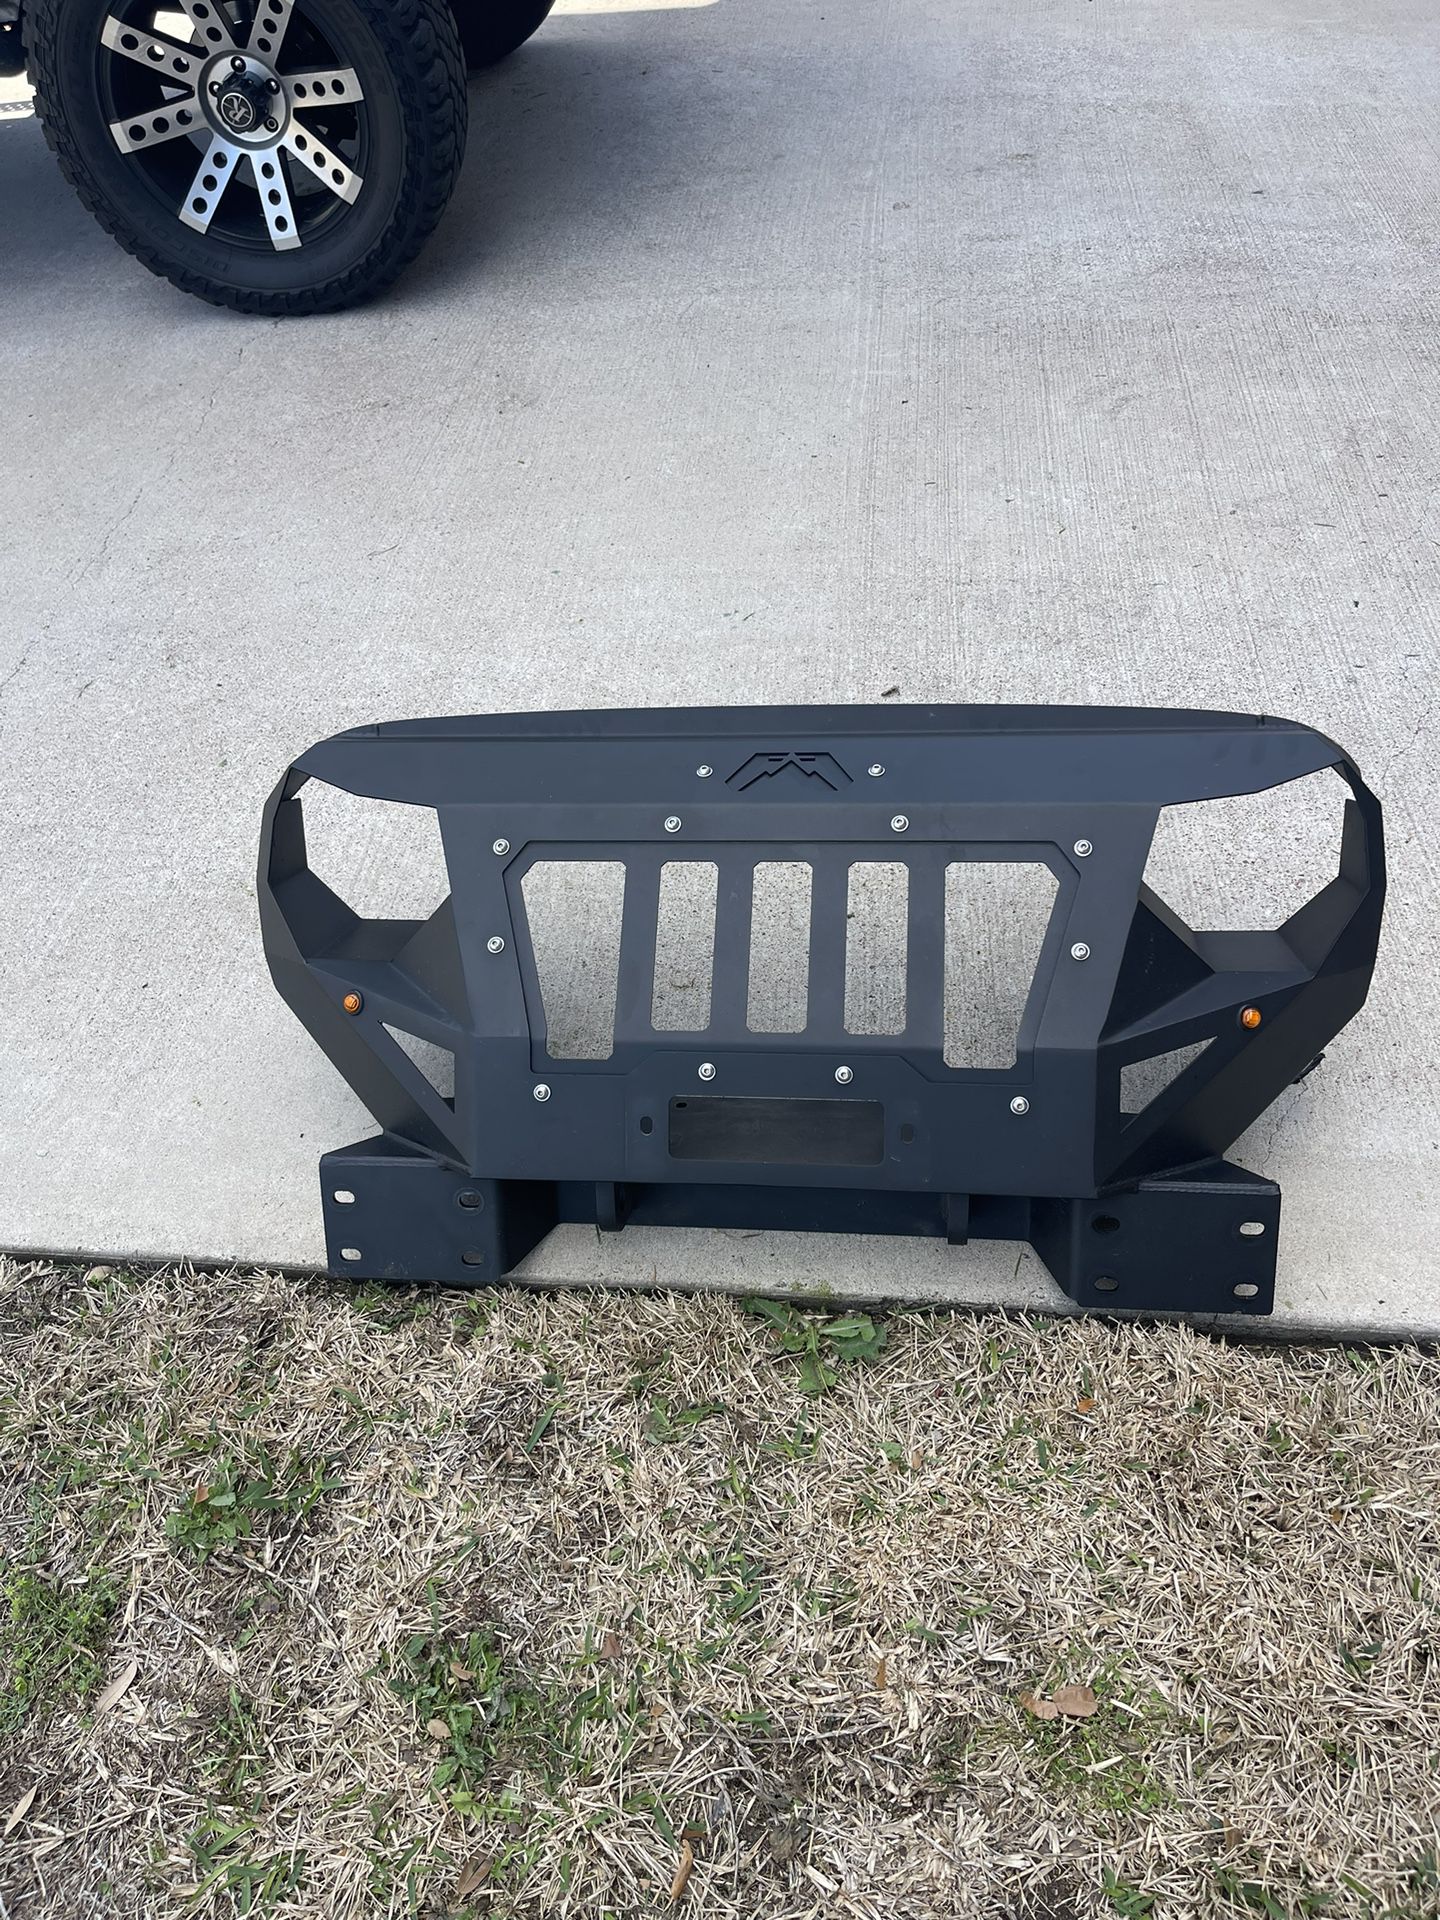 Grumper/Jeep Front Grill